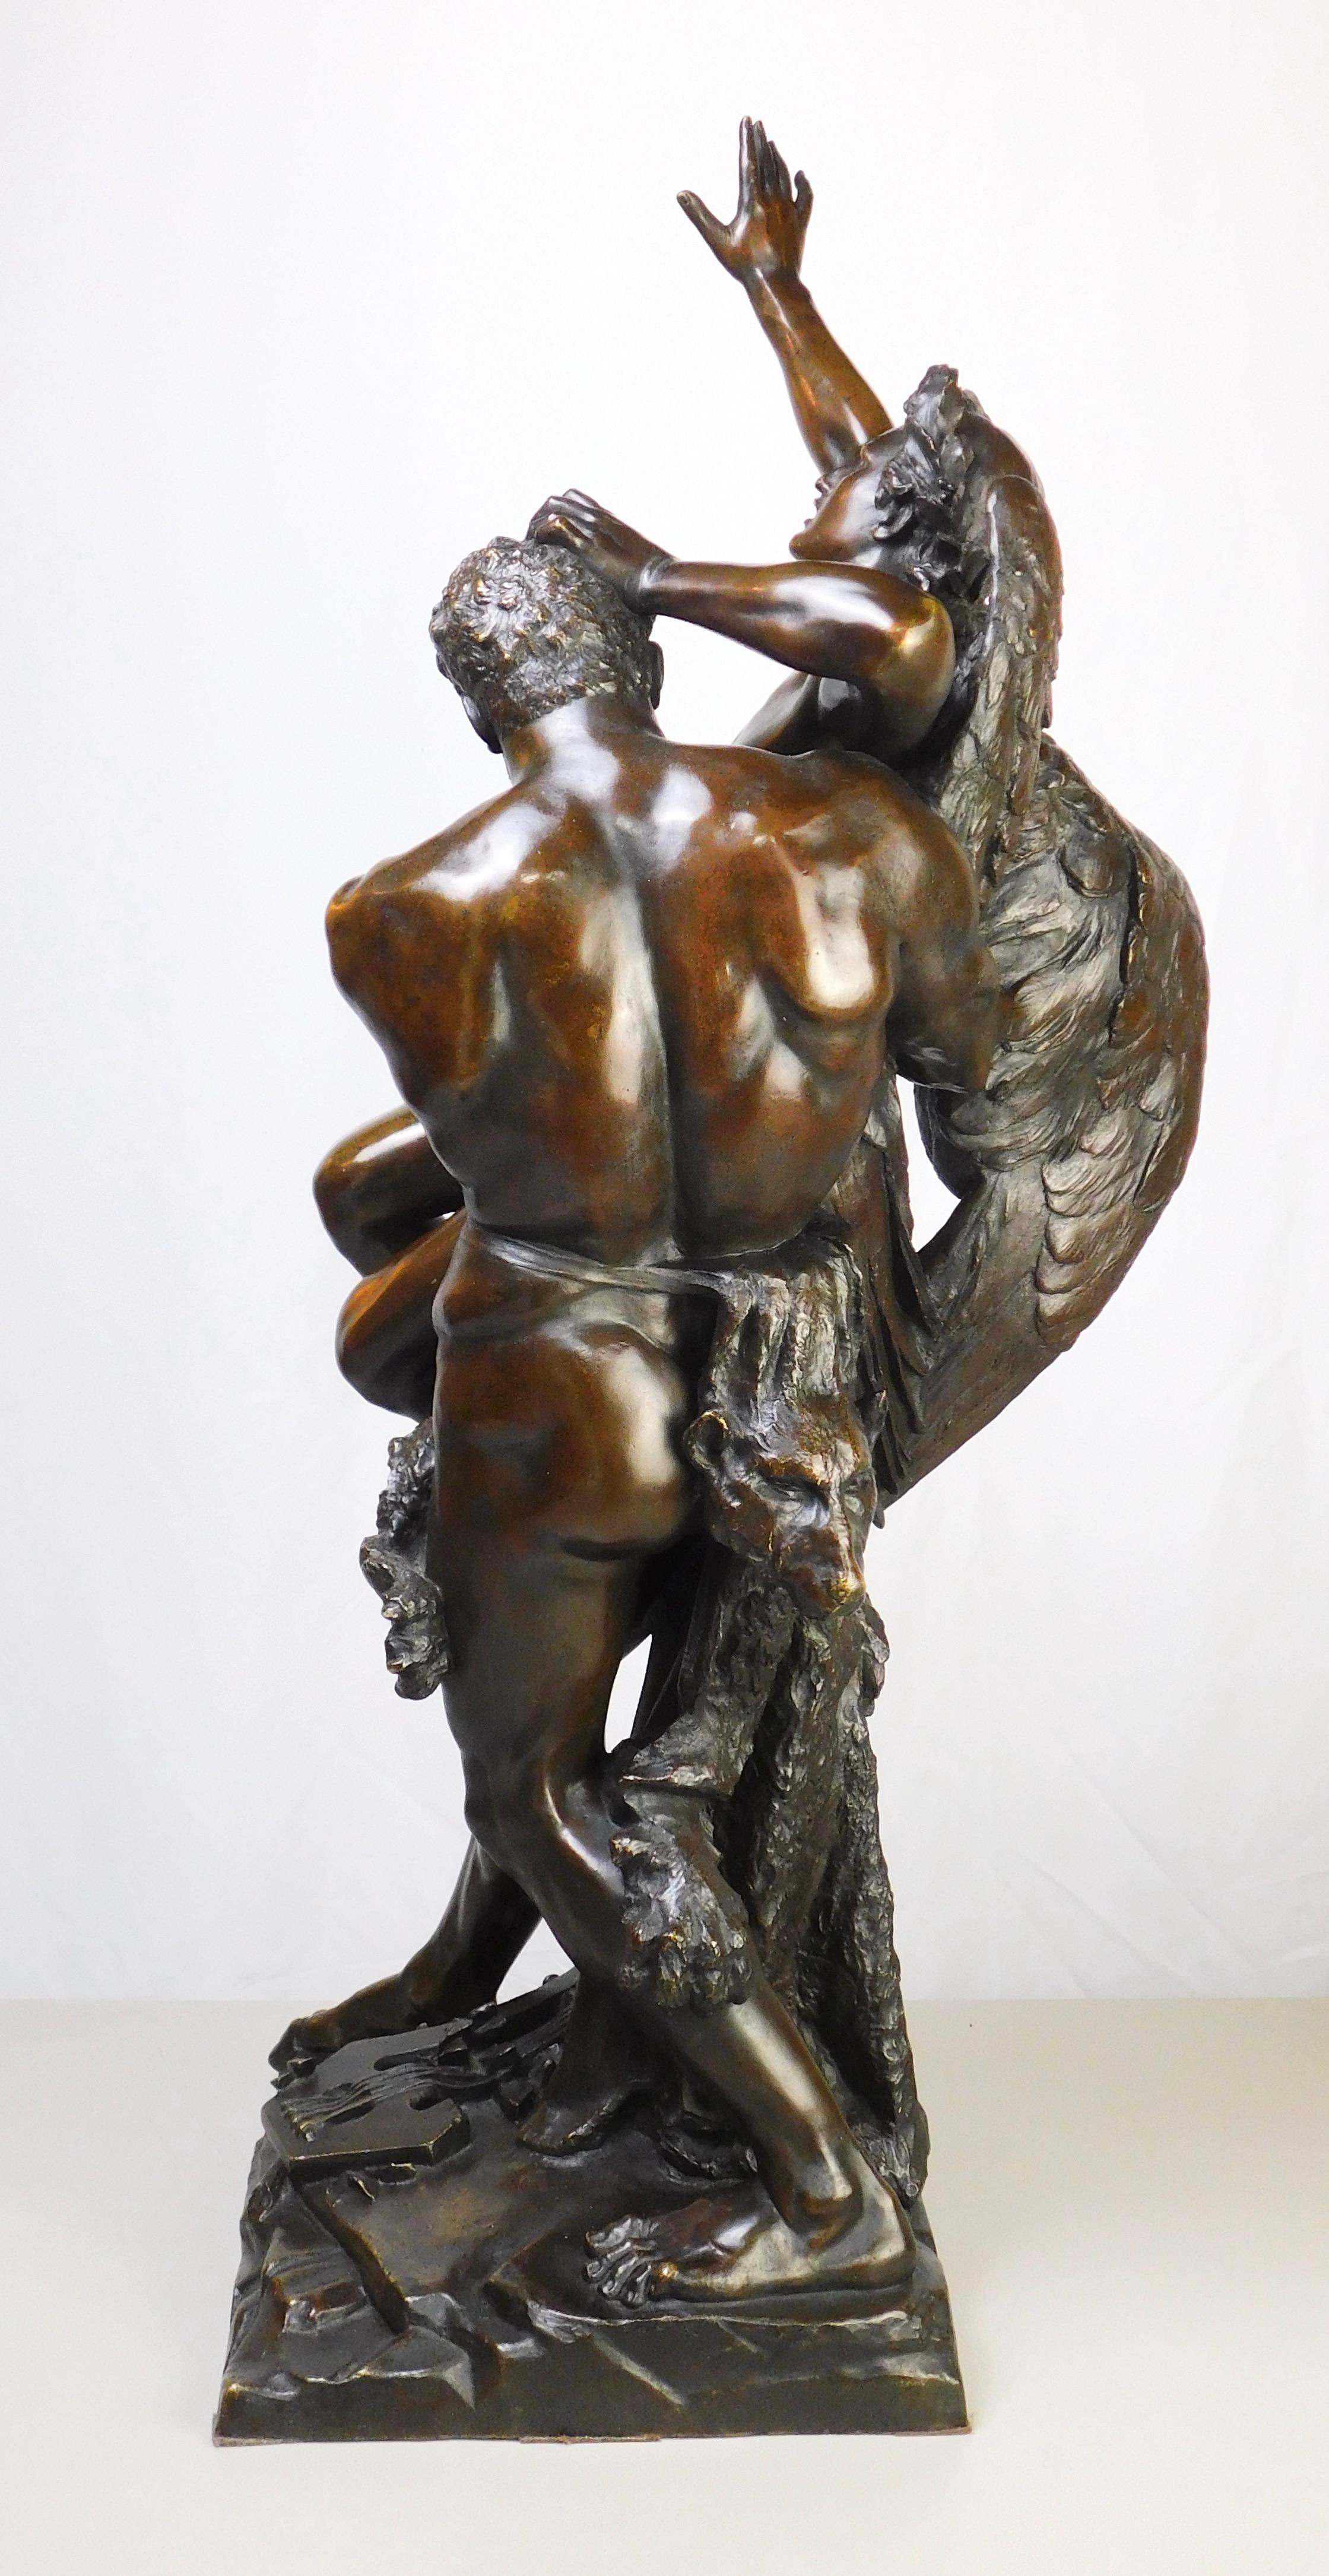 Antique Bronze Sculpture Genius and Brute Force by Cyprien Godebski In Good Condition For Sale In Antwerp, BE